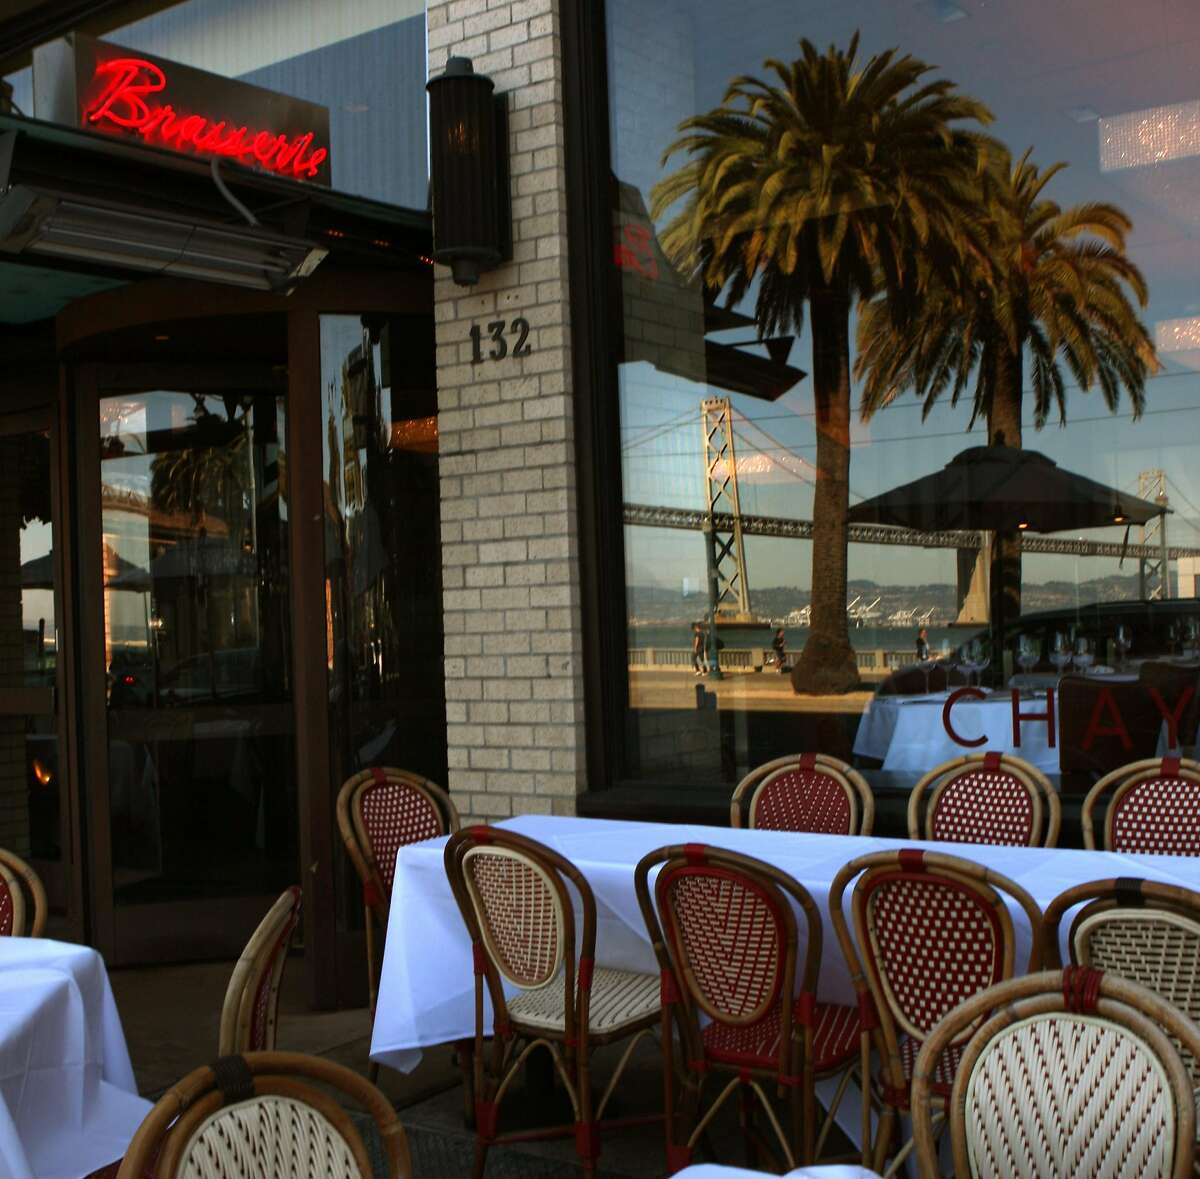 Chaya Brasserie seen on the west side of the Embarcadero in San Francisco, California, on Monday, September 9, 2013.